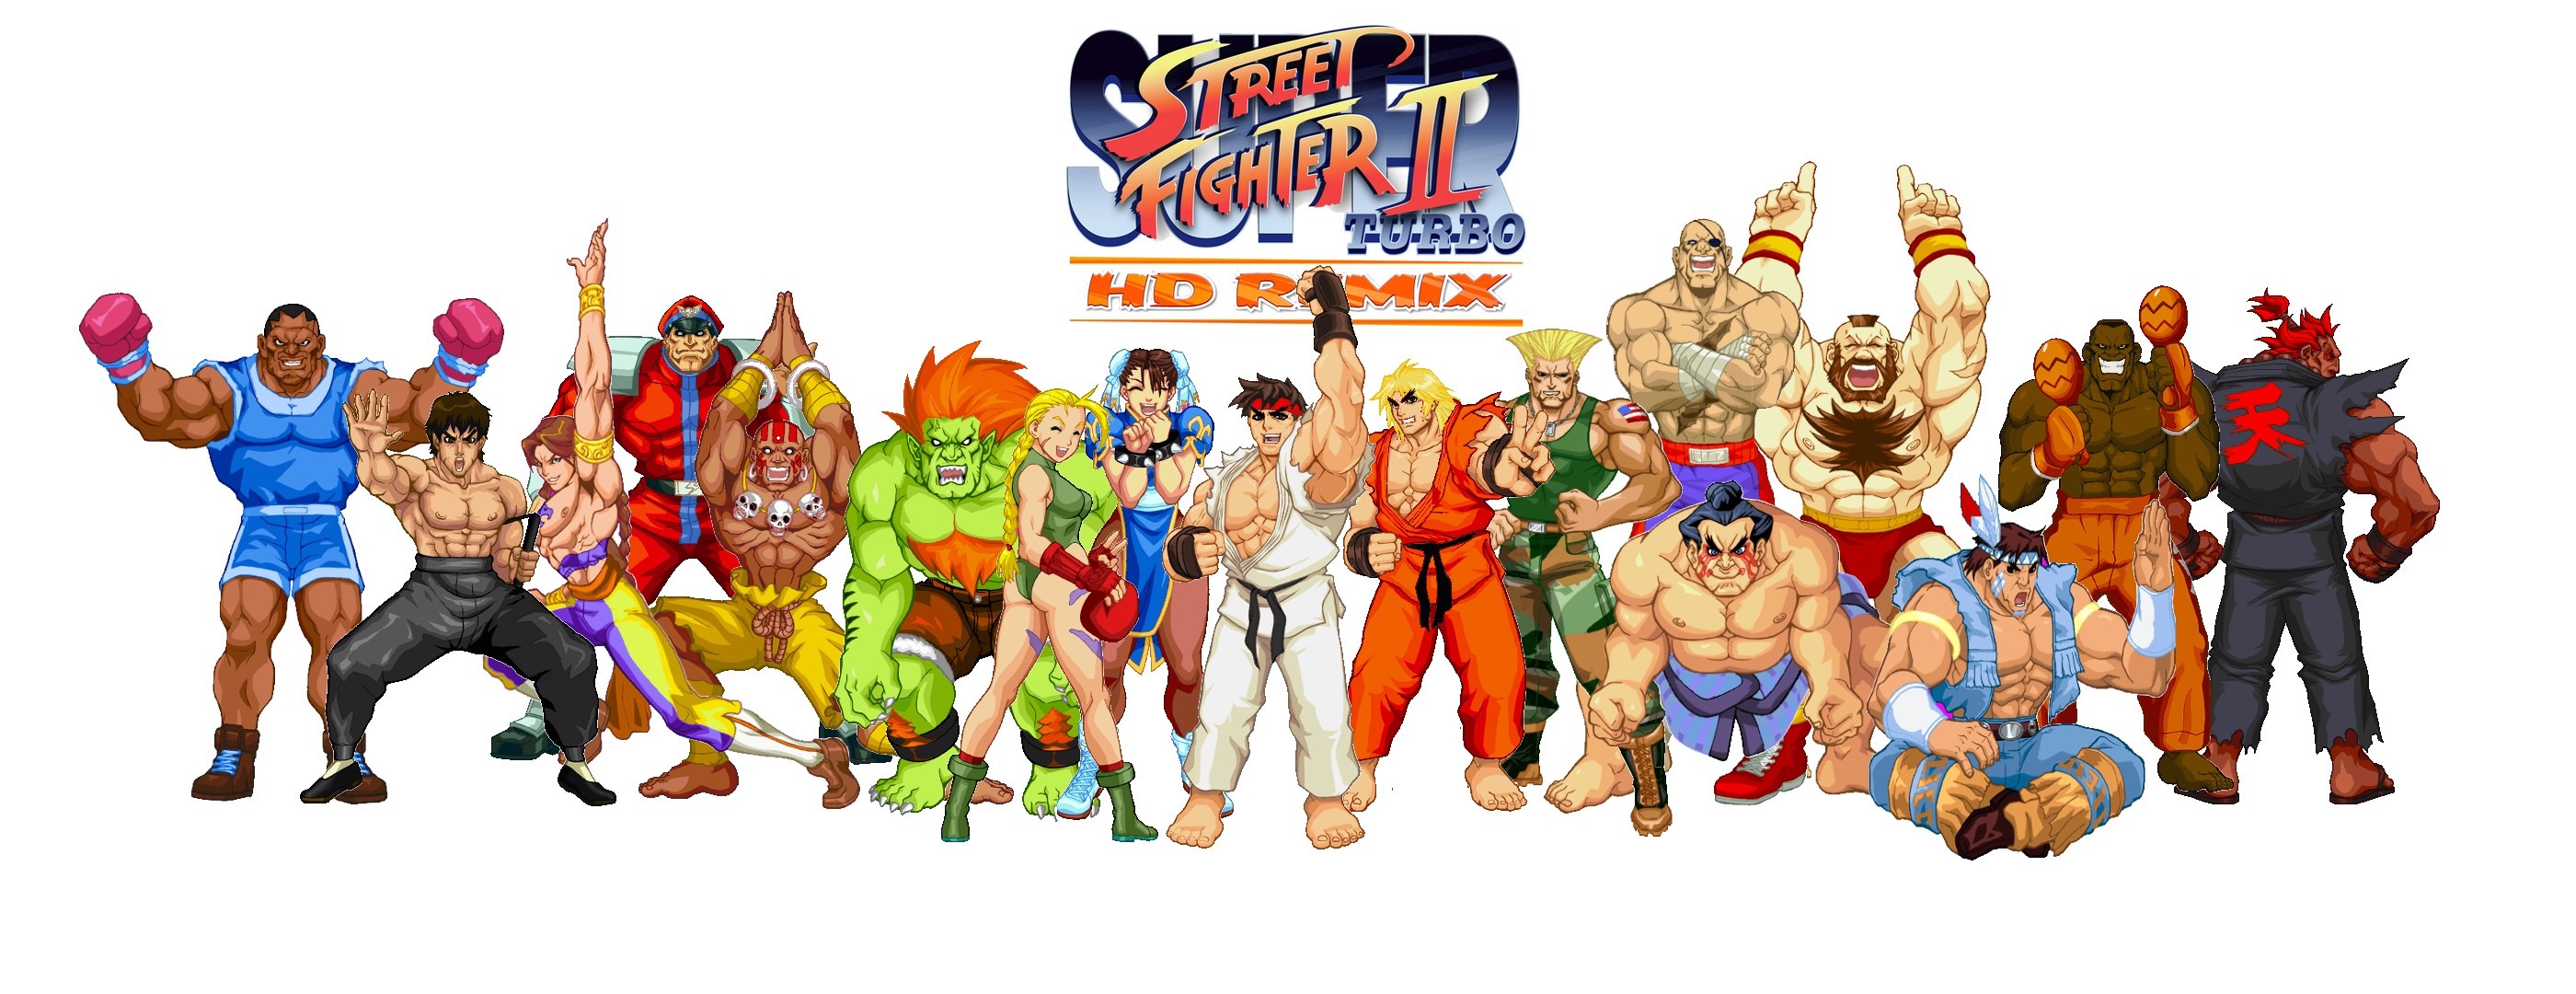 super_street_fighter_2_turbo_hd_remix_by